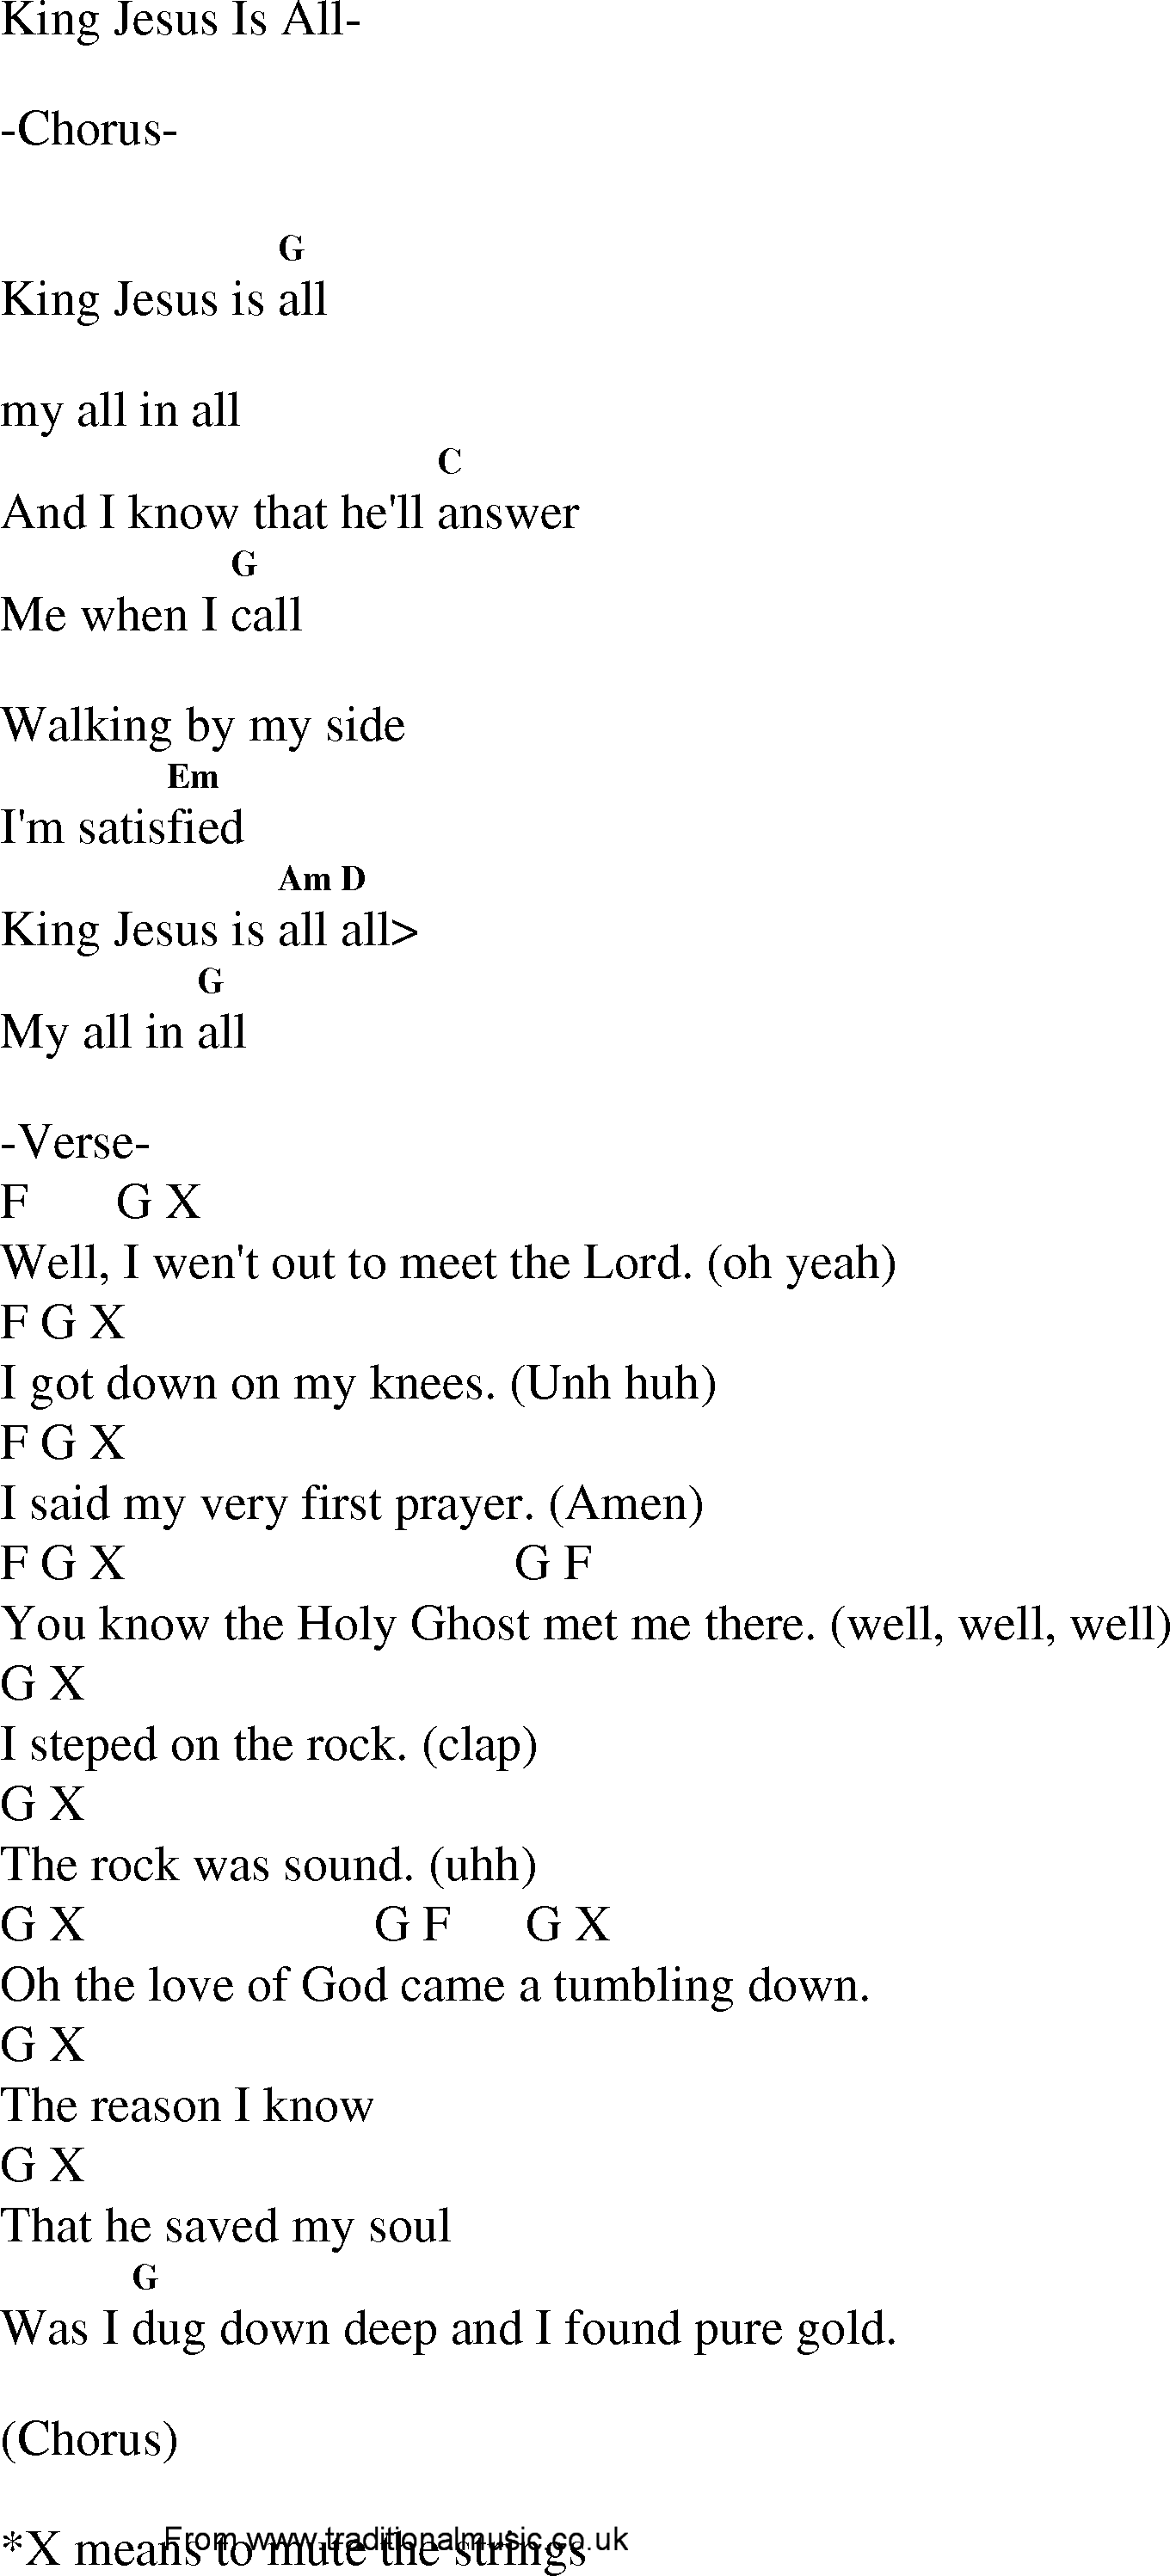 Gospel Song: king_jesus_is_all, lyrics and chords.